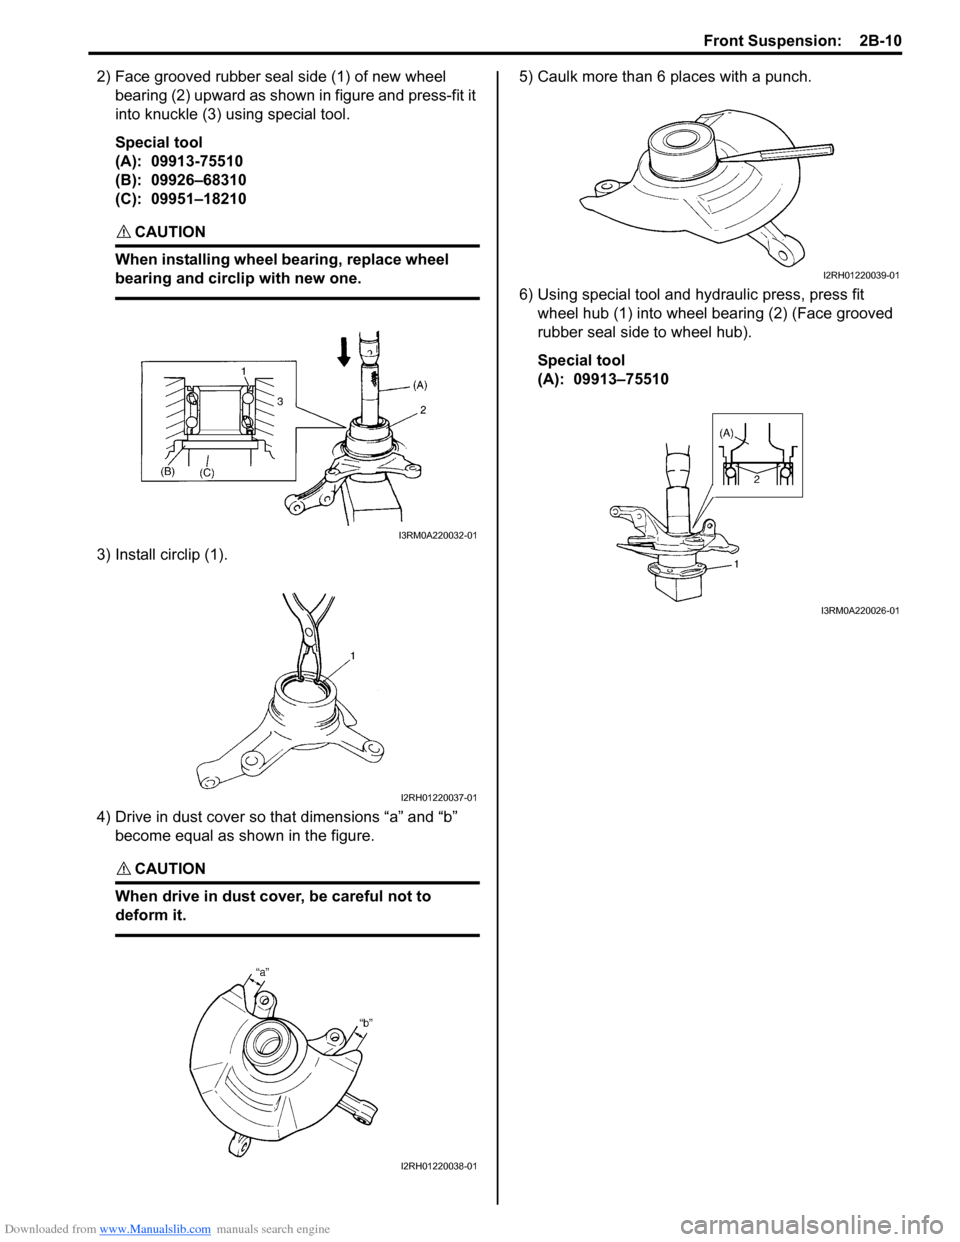 SUZUKI SWIFT 2005 2.G Service Workshop Manual Downloaded from www.Manualslib.com manuals search engine Front Suspension:  2B-10
2) Face grooved rubber seal side (1) of new wheel bearing (2) upward as shown in figure and press-fit it 
into knuckle